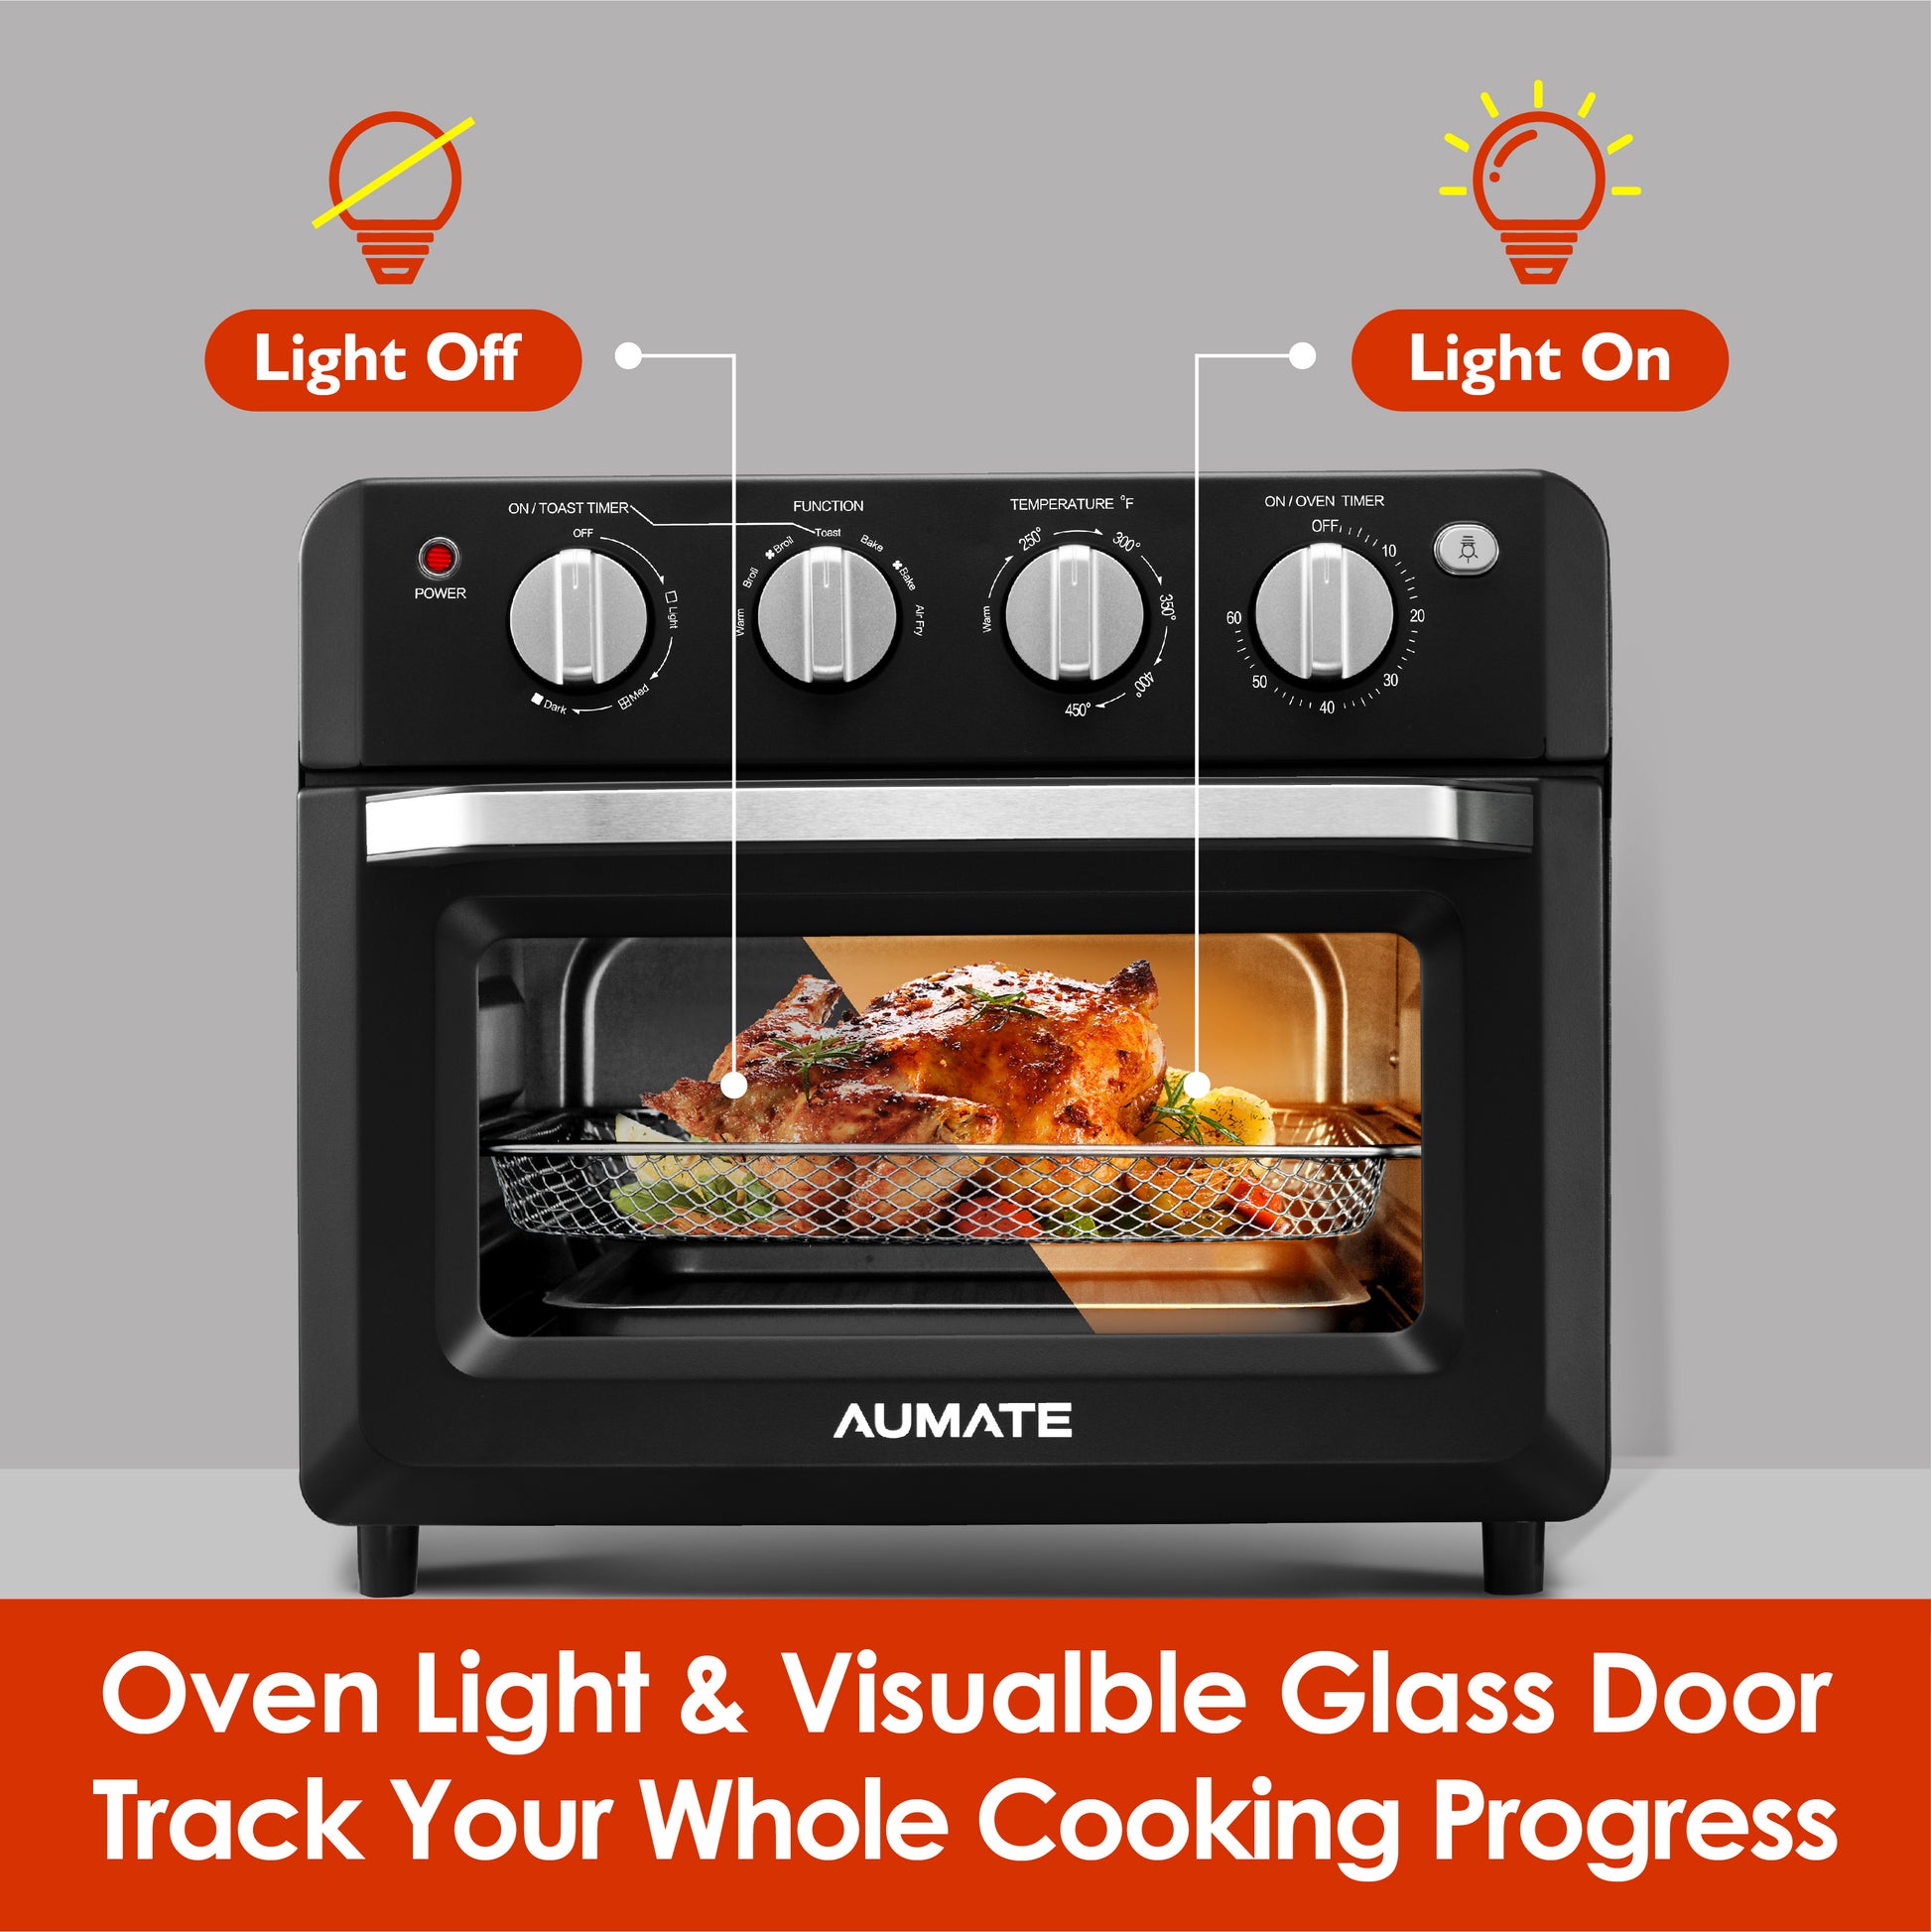  Toaster Oven Air Fryer Combo 19-Quart, AUMATE Kitchen in the  box 7 in 1 Convection Toaster Oven Countertop, Oilless Air Fryer Oven,  Includes Baking Pan, Oven Rack, Fry Basket, Crumb Tray